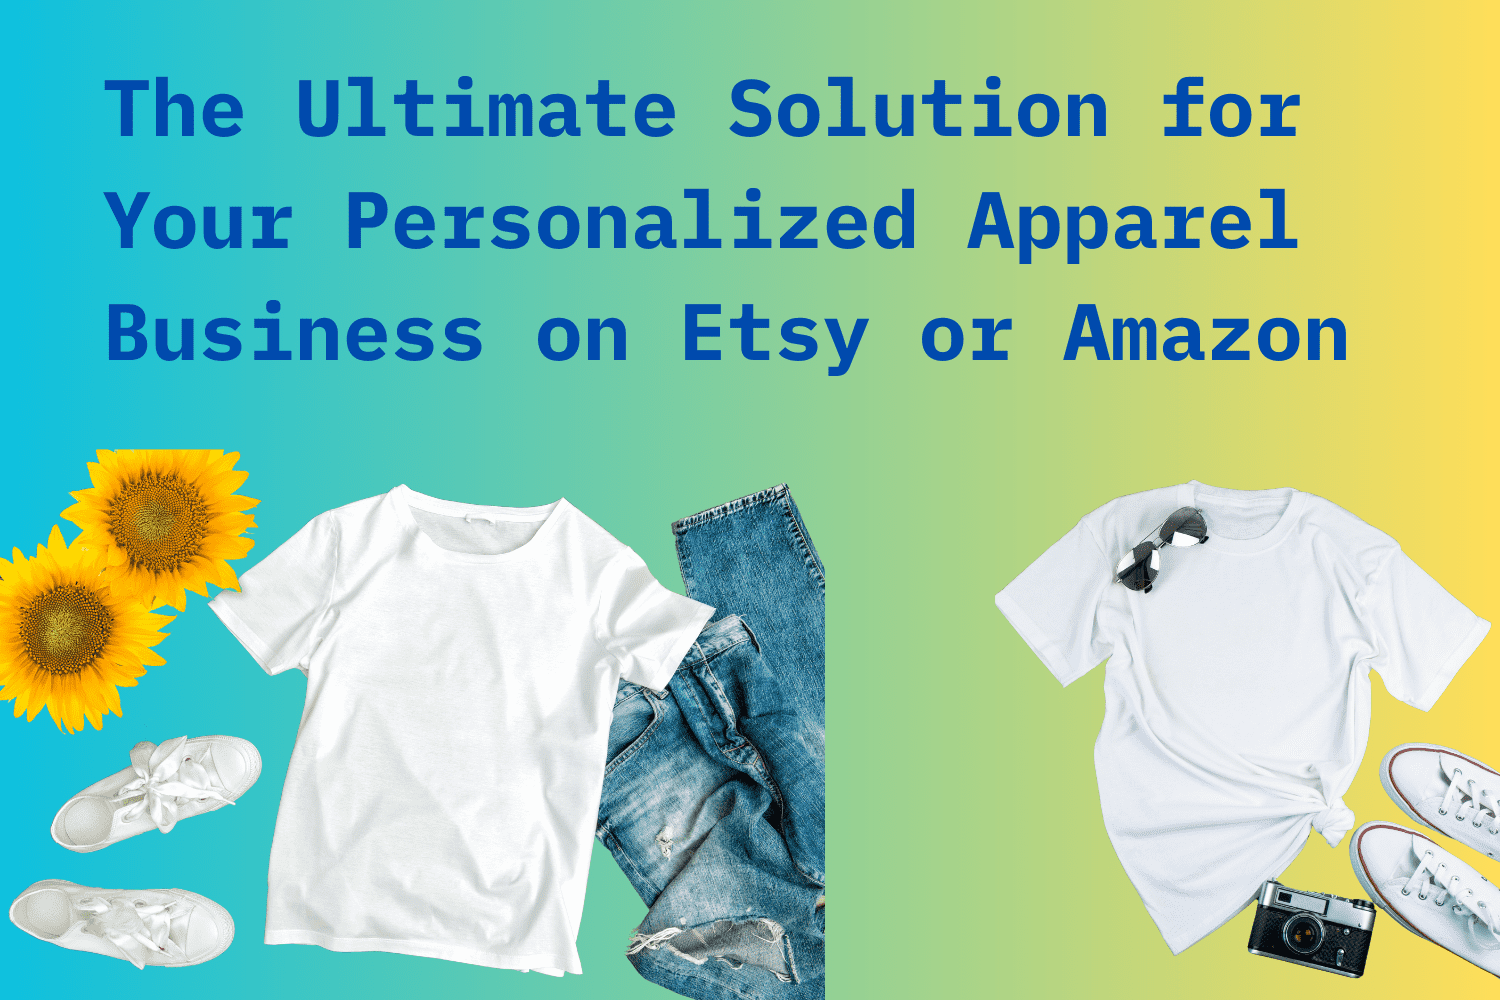 Personalized Apparel Business on Etsy or Amazon